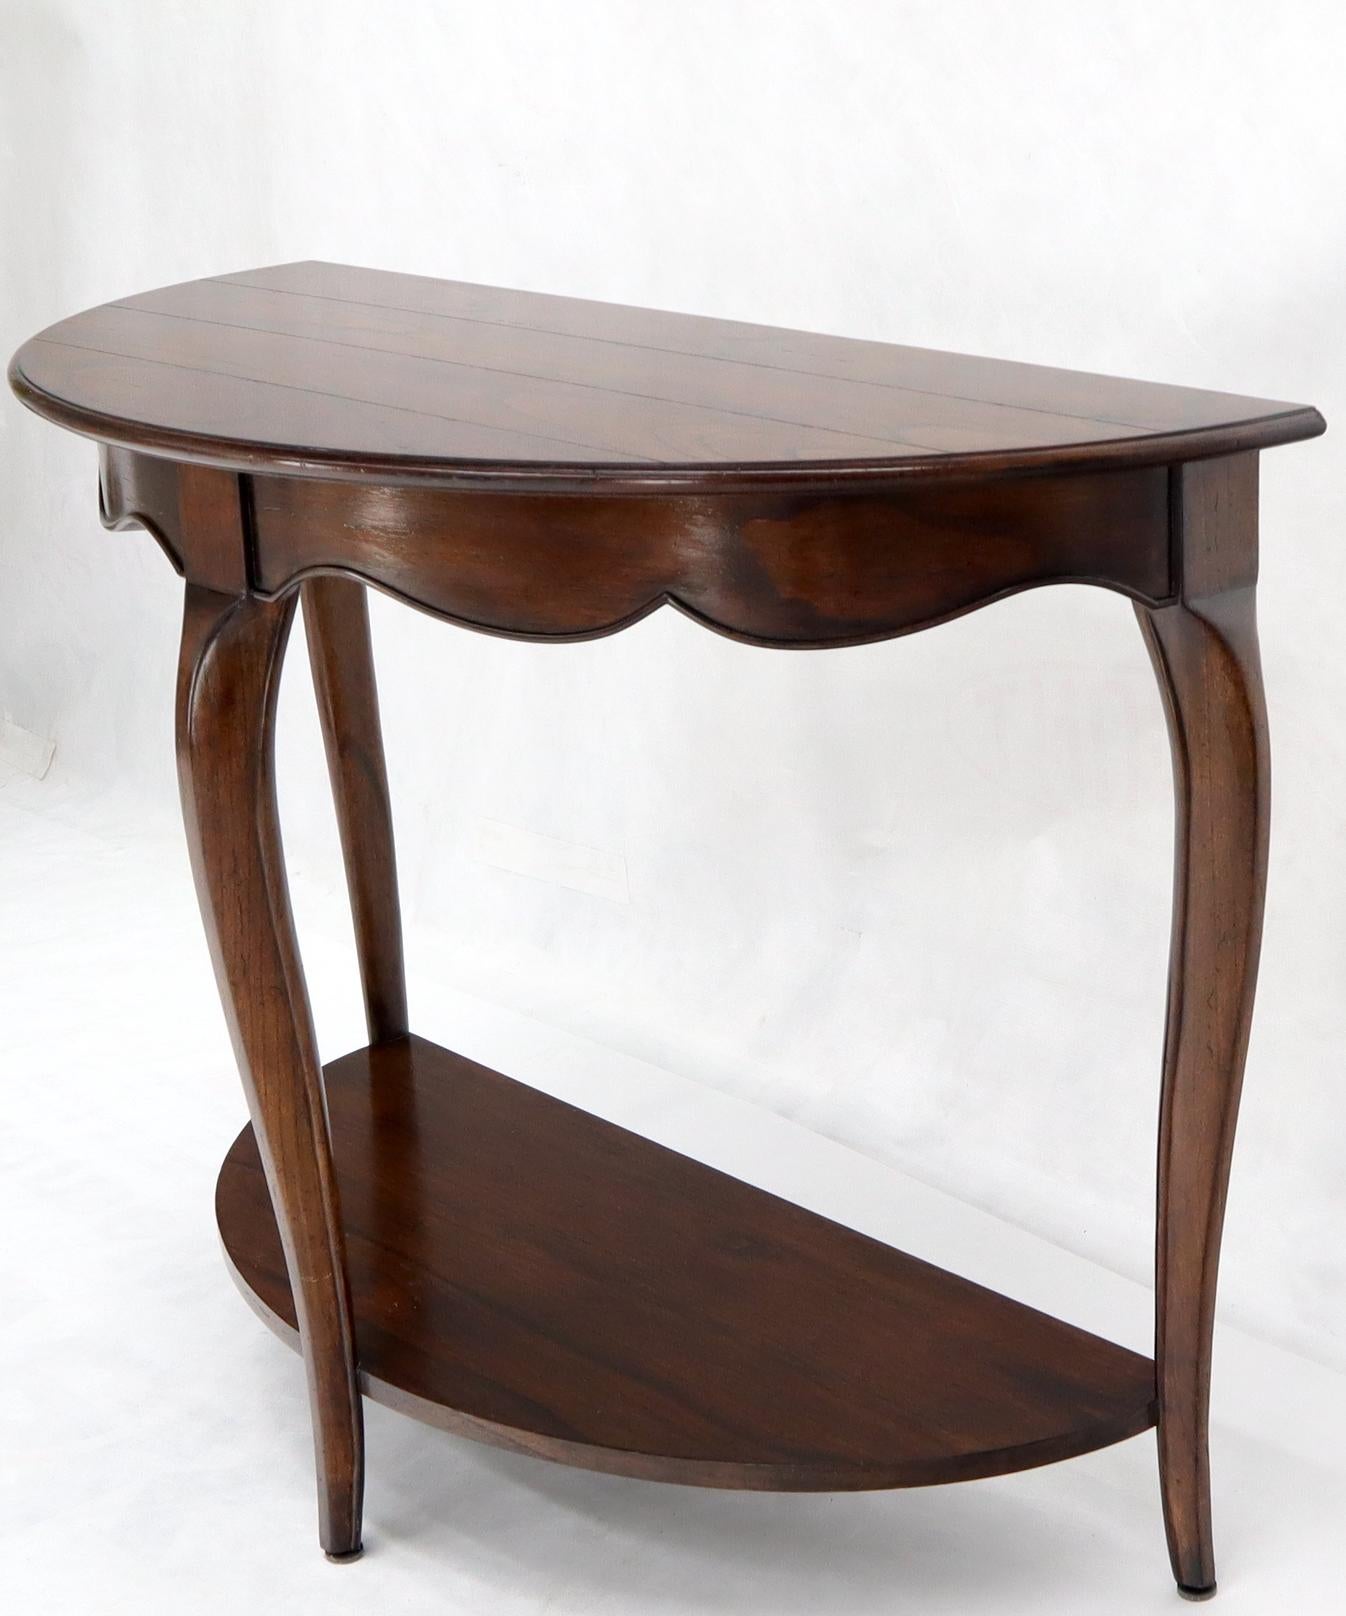 Solid Cherry Demilune Console Table by Baker In Excellent Condition For Sale In Rockaway, NJ